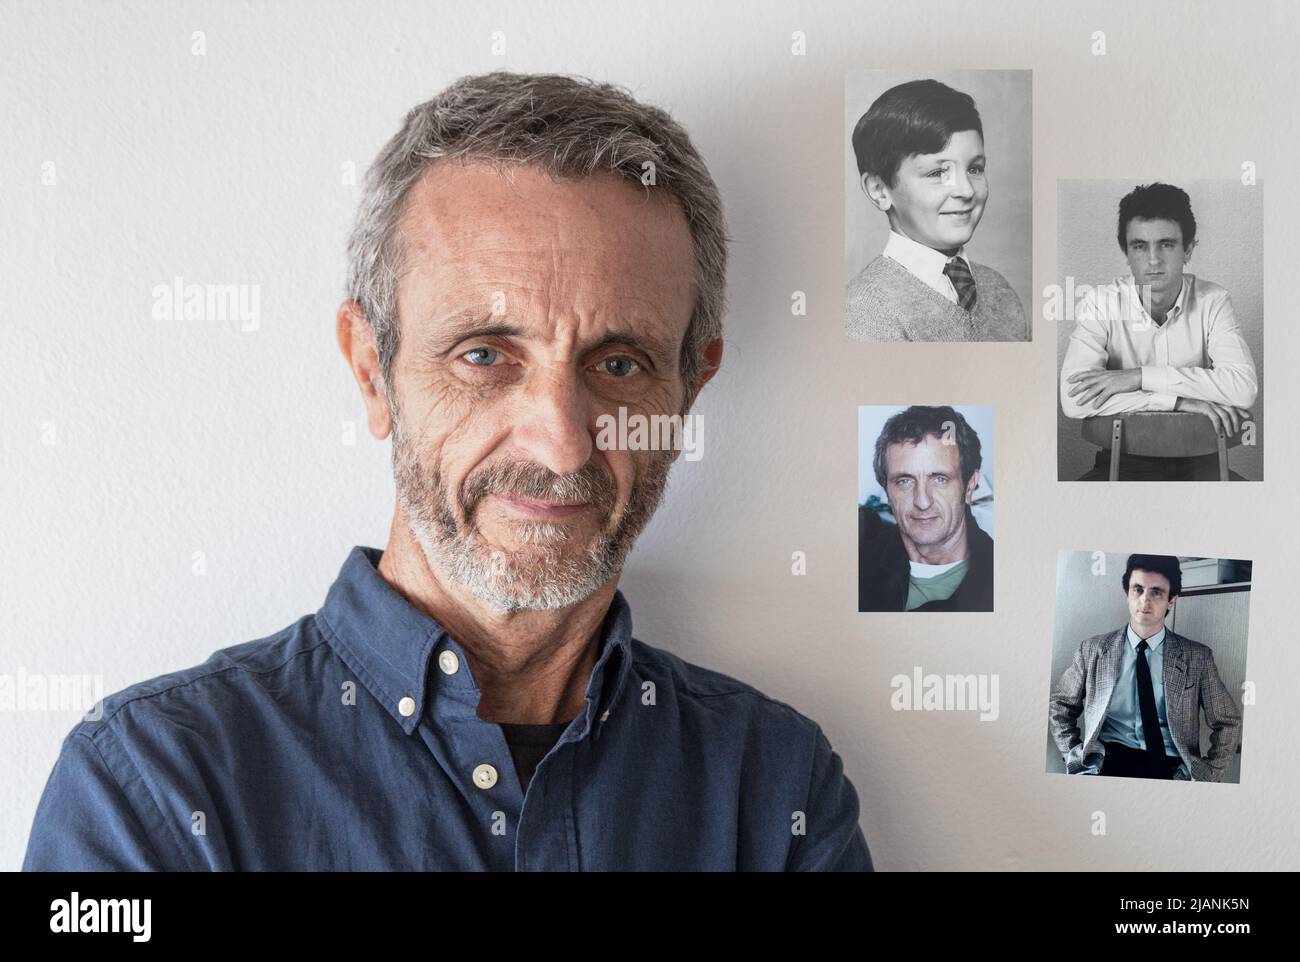 Young to old age comparison concept. Same person in all photographs. Stock Photo